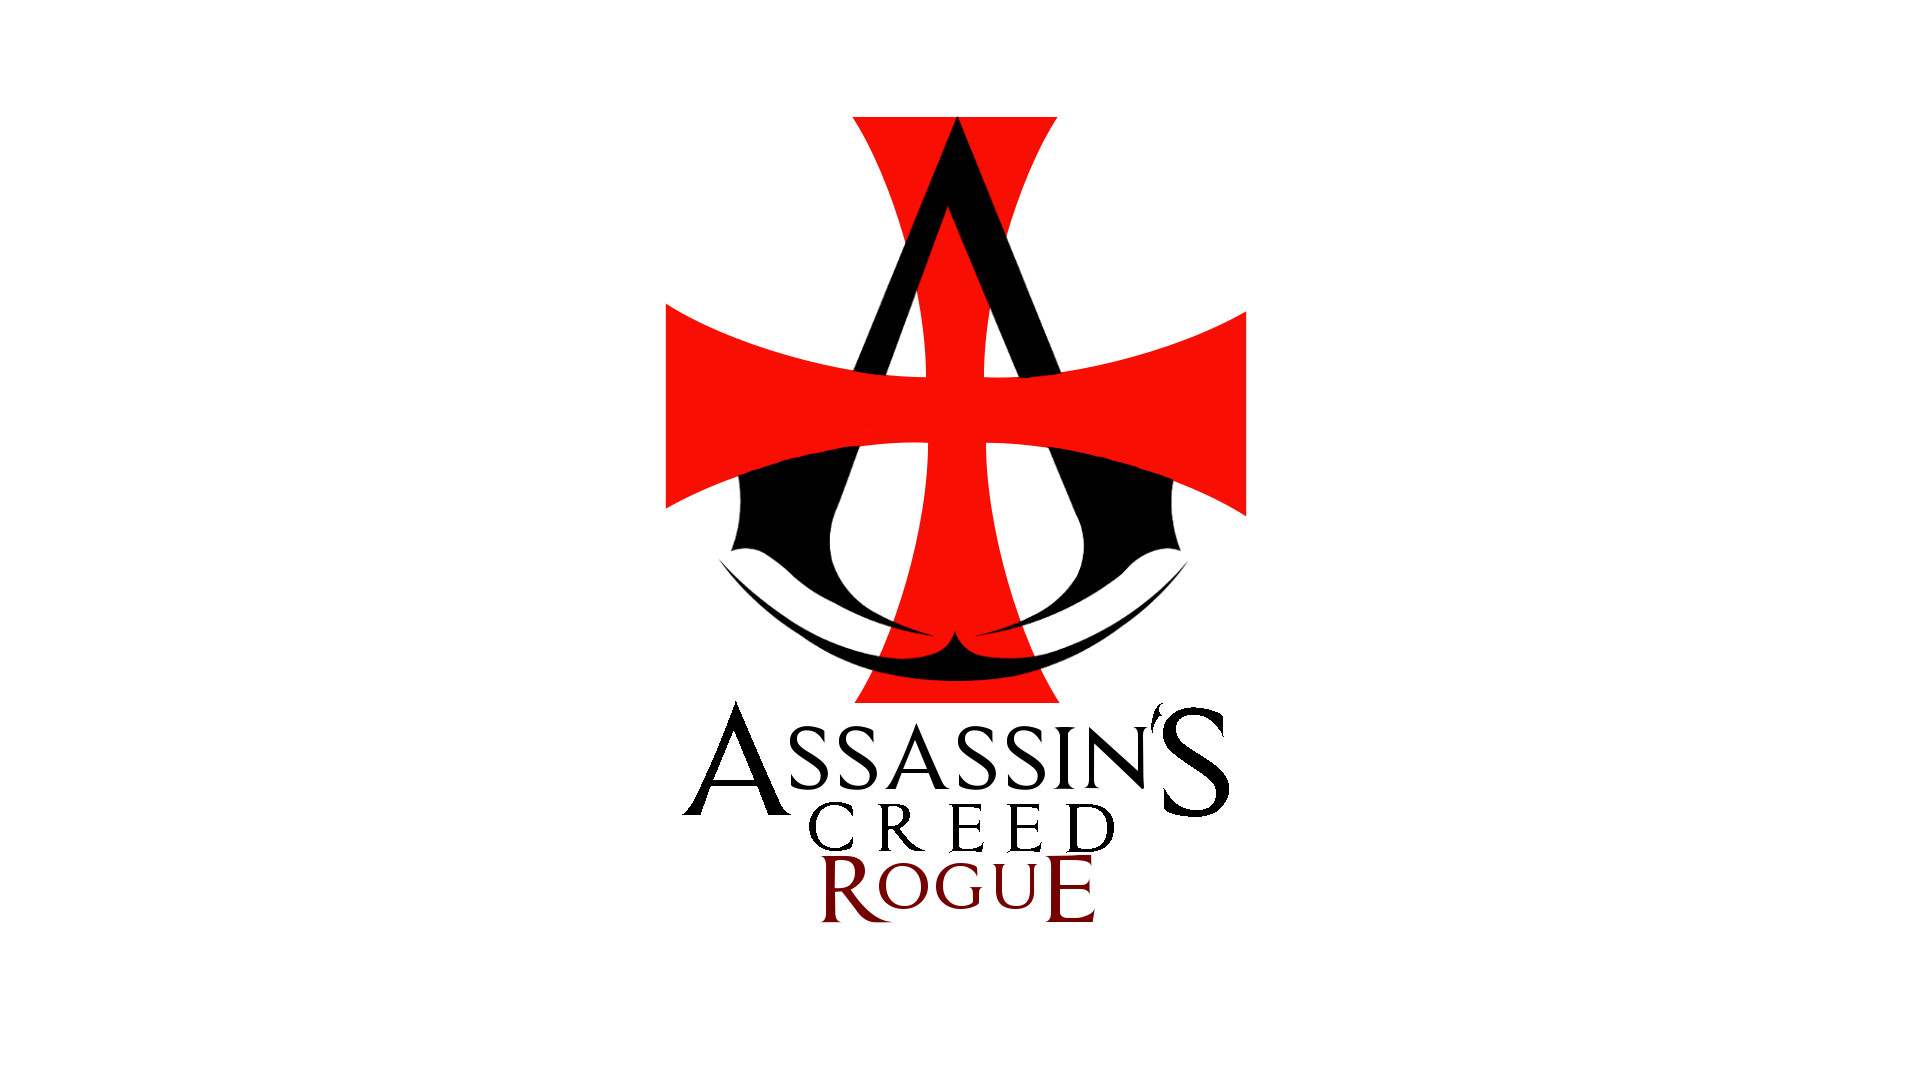 1920x1080 ... Assassin's Creed Rogue Simple Wallpaper(my take) by TheJackMoriarty